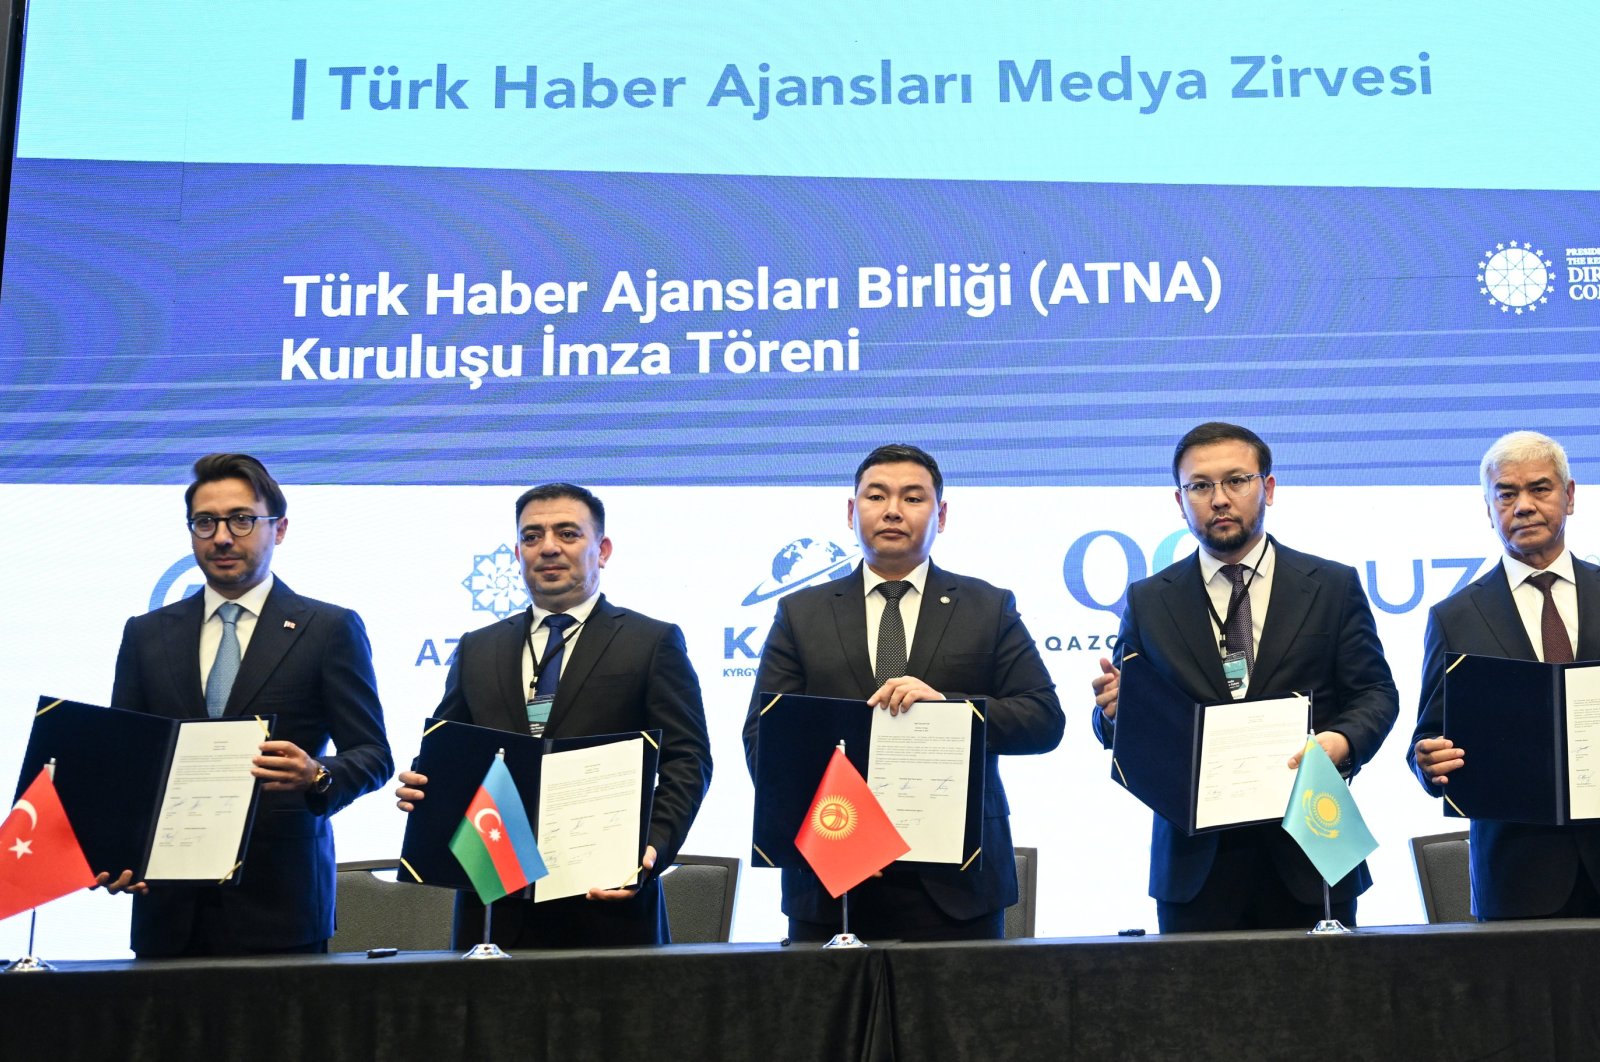 Chairs of the state news agencies of five countries of the Turkic world, namely Türkiye, Azerbaijan, Kyrgyzstan, Kazakhstan and Uzbekistan, during a meeting where they signed agreements to form the Association of Turkic News Agencies (ATNA), Istanbul, Türkiye, Nov. 6, 2023. (AA Photo)